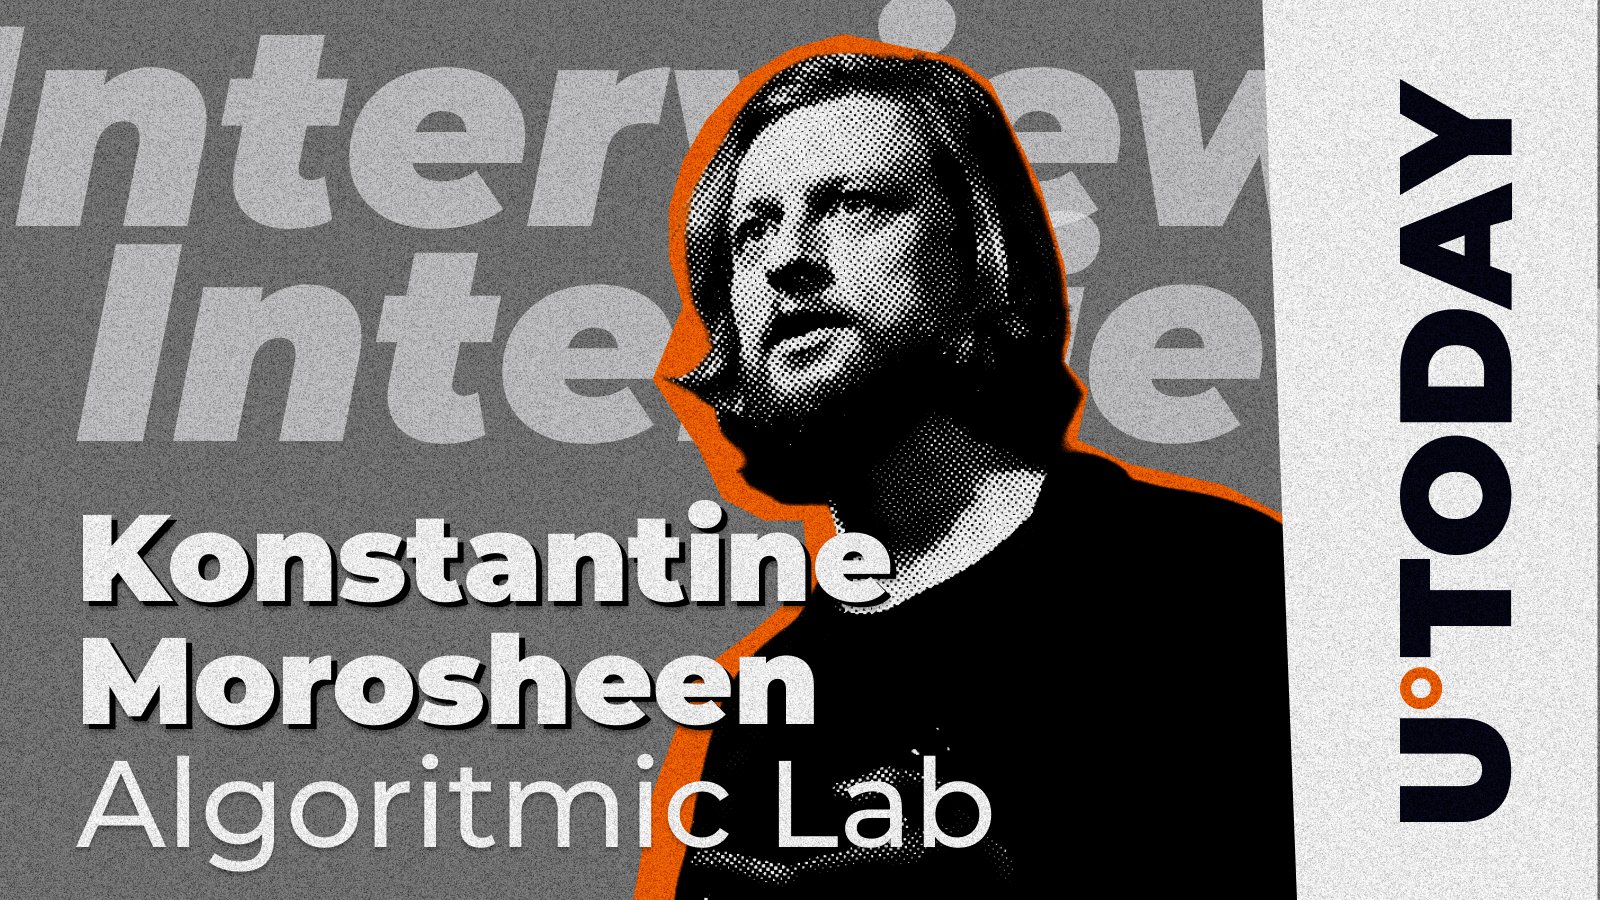 Algoritmic Lab's Mission, Stalwart AI-Powered Platform Introduced and Future of AI in Web3: Interview With Algoritmic Lab CEO Konstantine Morosheen